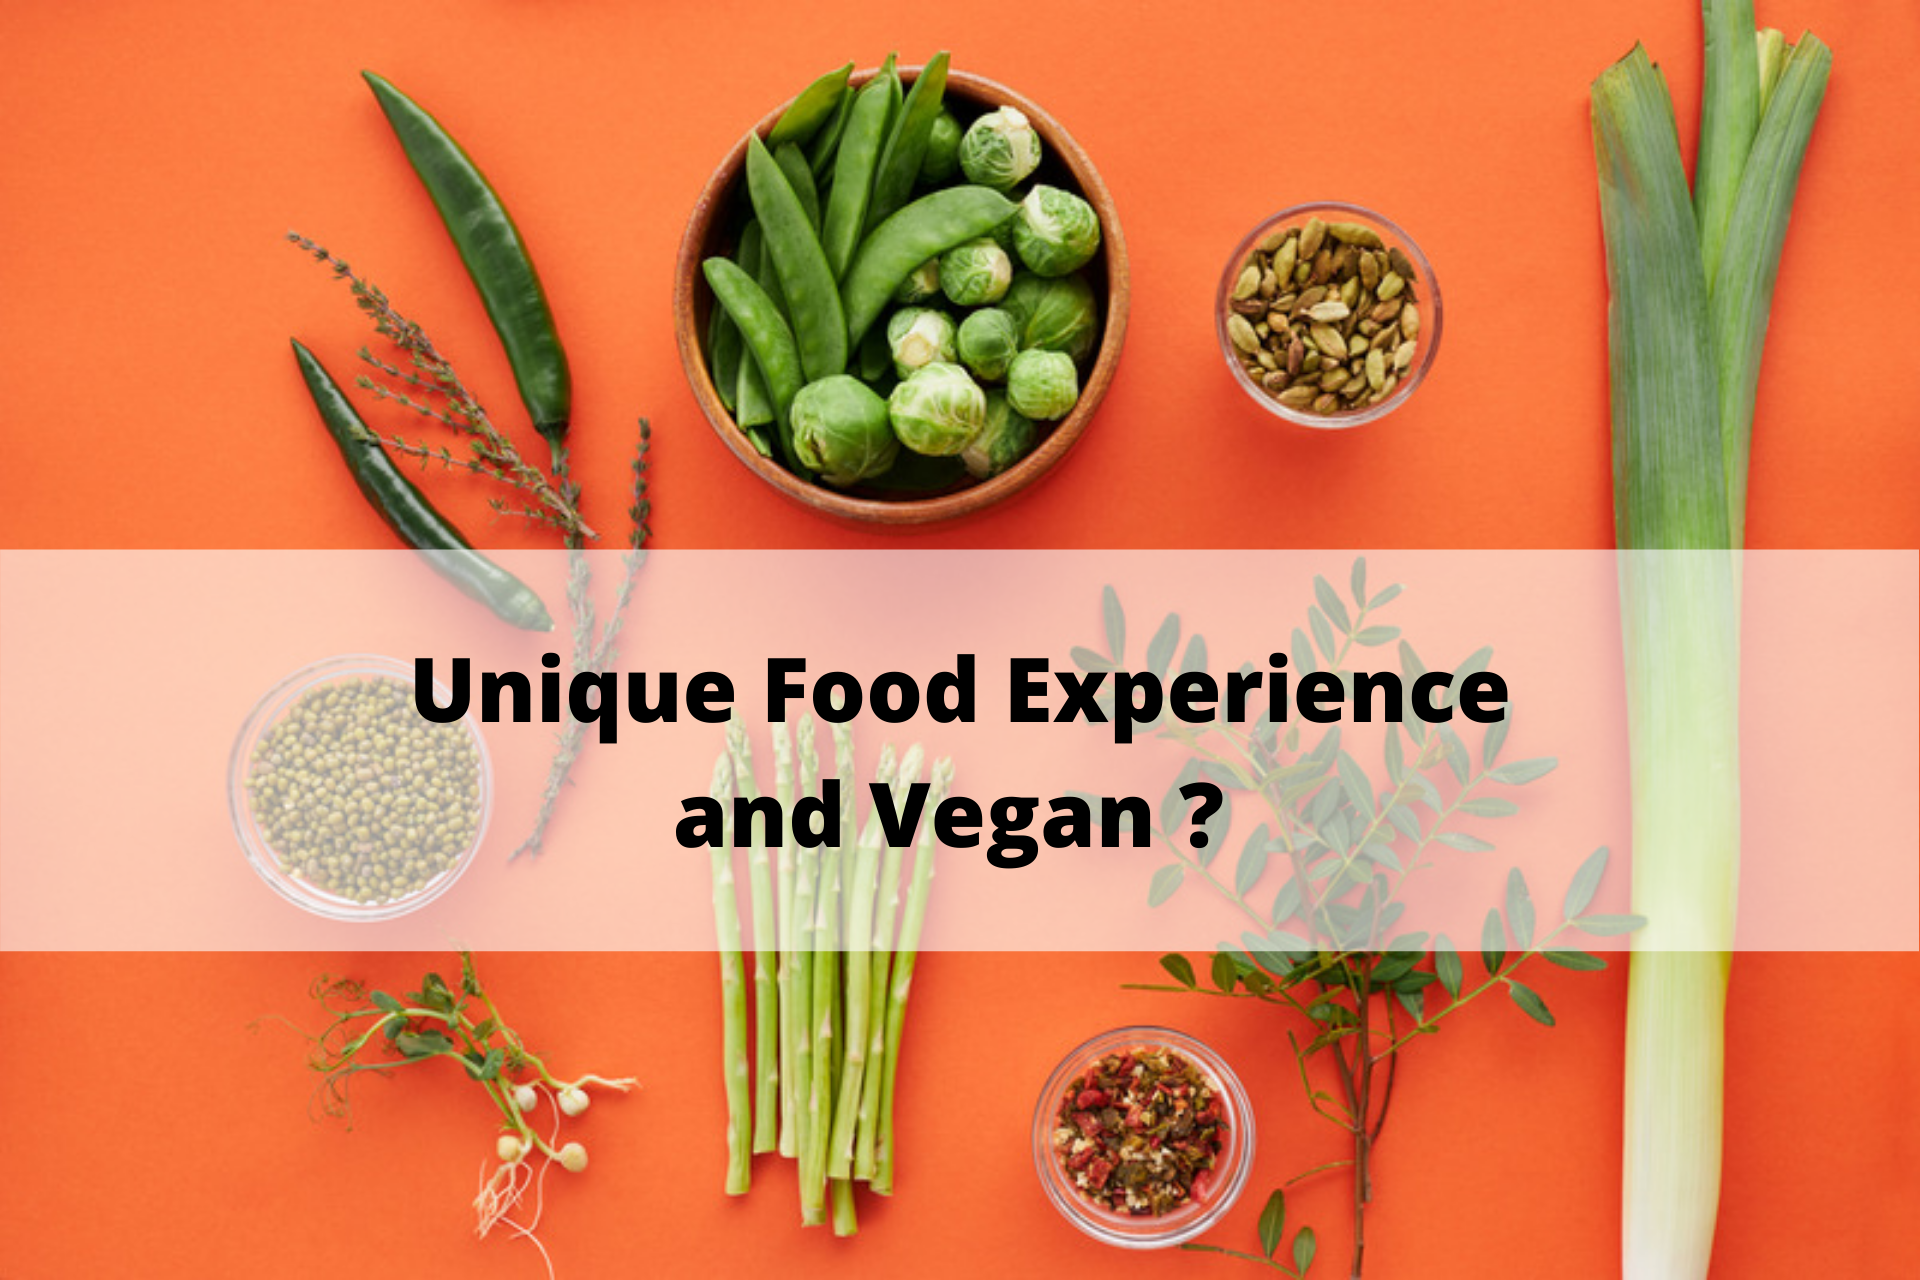 Unique Food Experience and Vegan ?  Veganster got you!!!